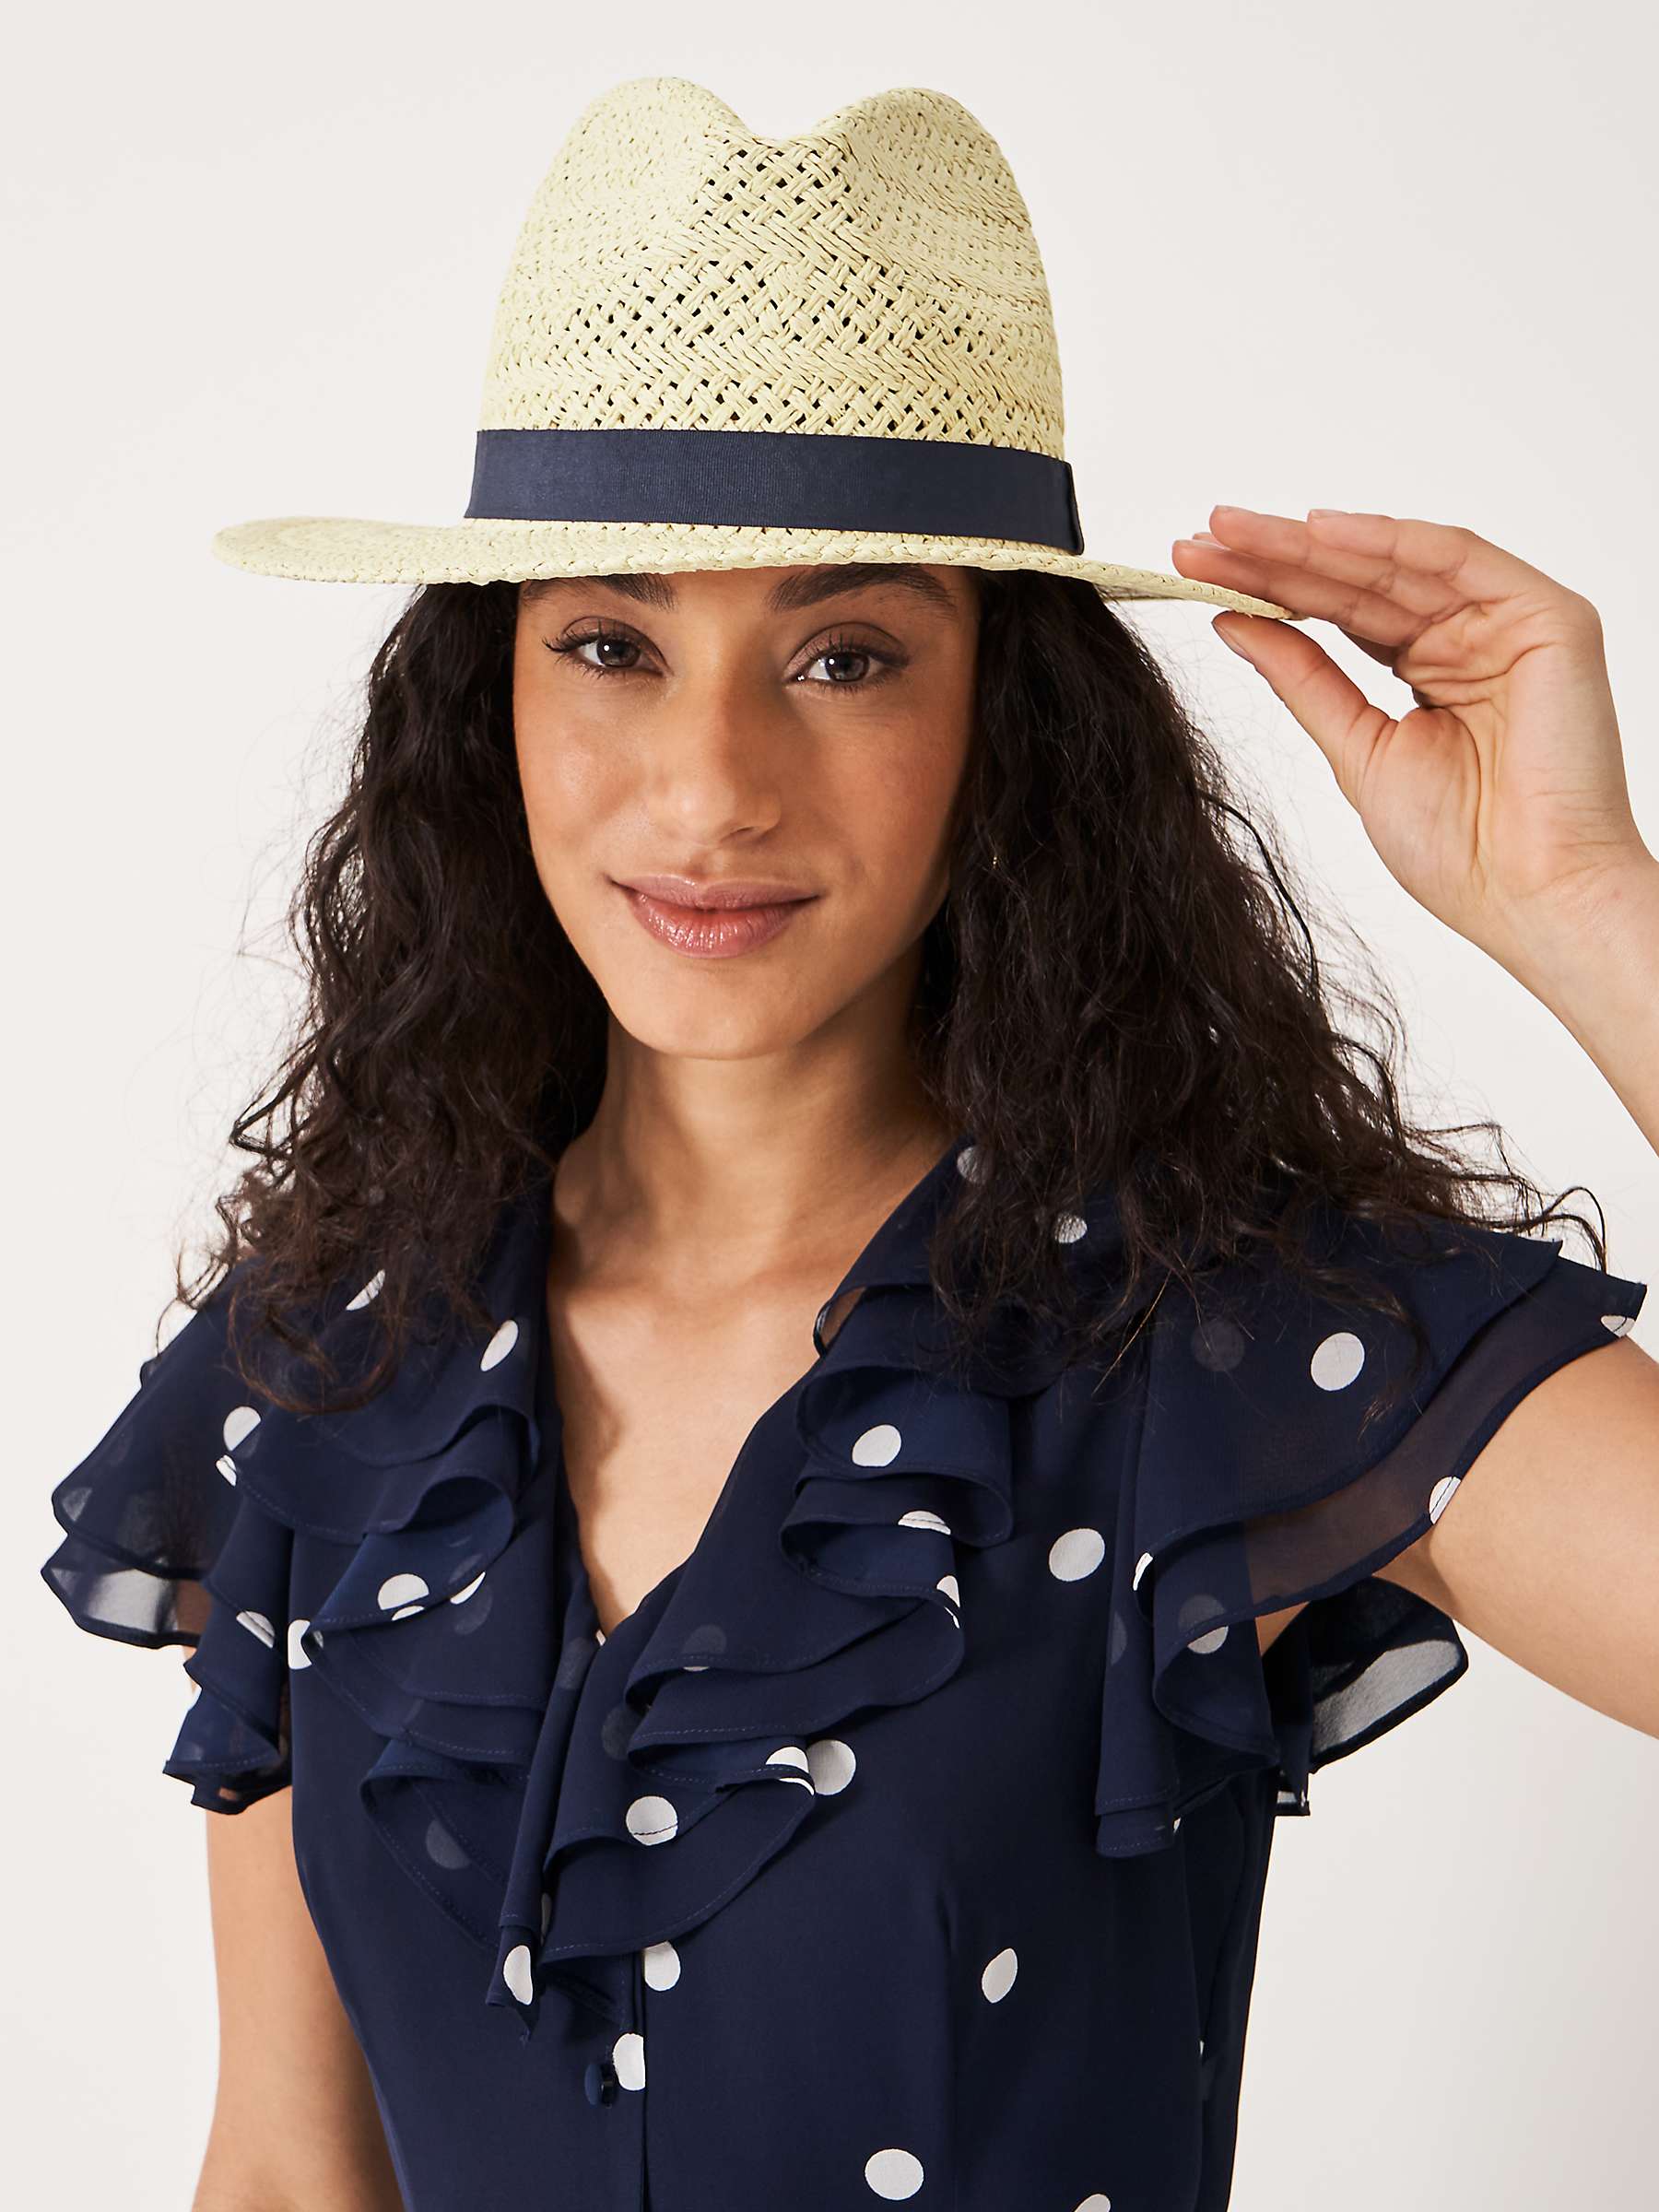 Buy Crew Clothing Woven Trilby Hat, Neutral/Navy Online at johnlewis.com